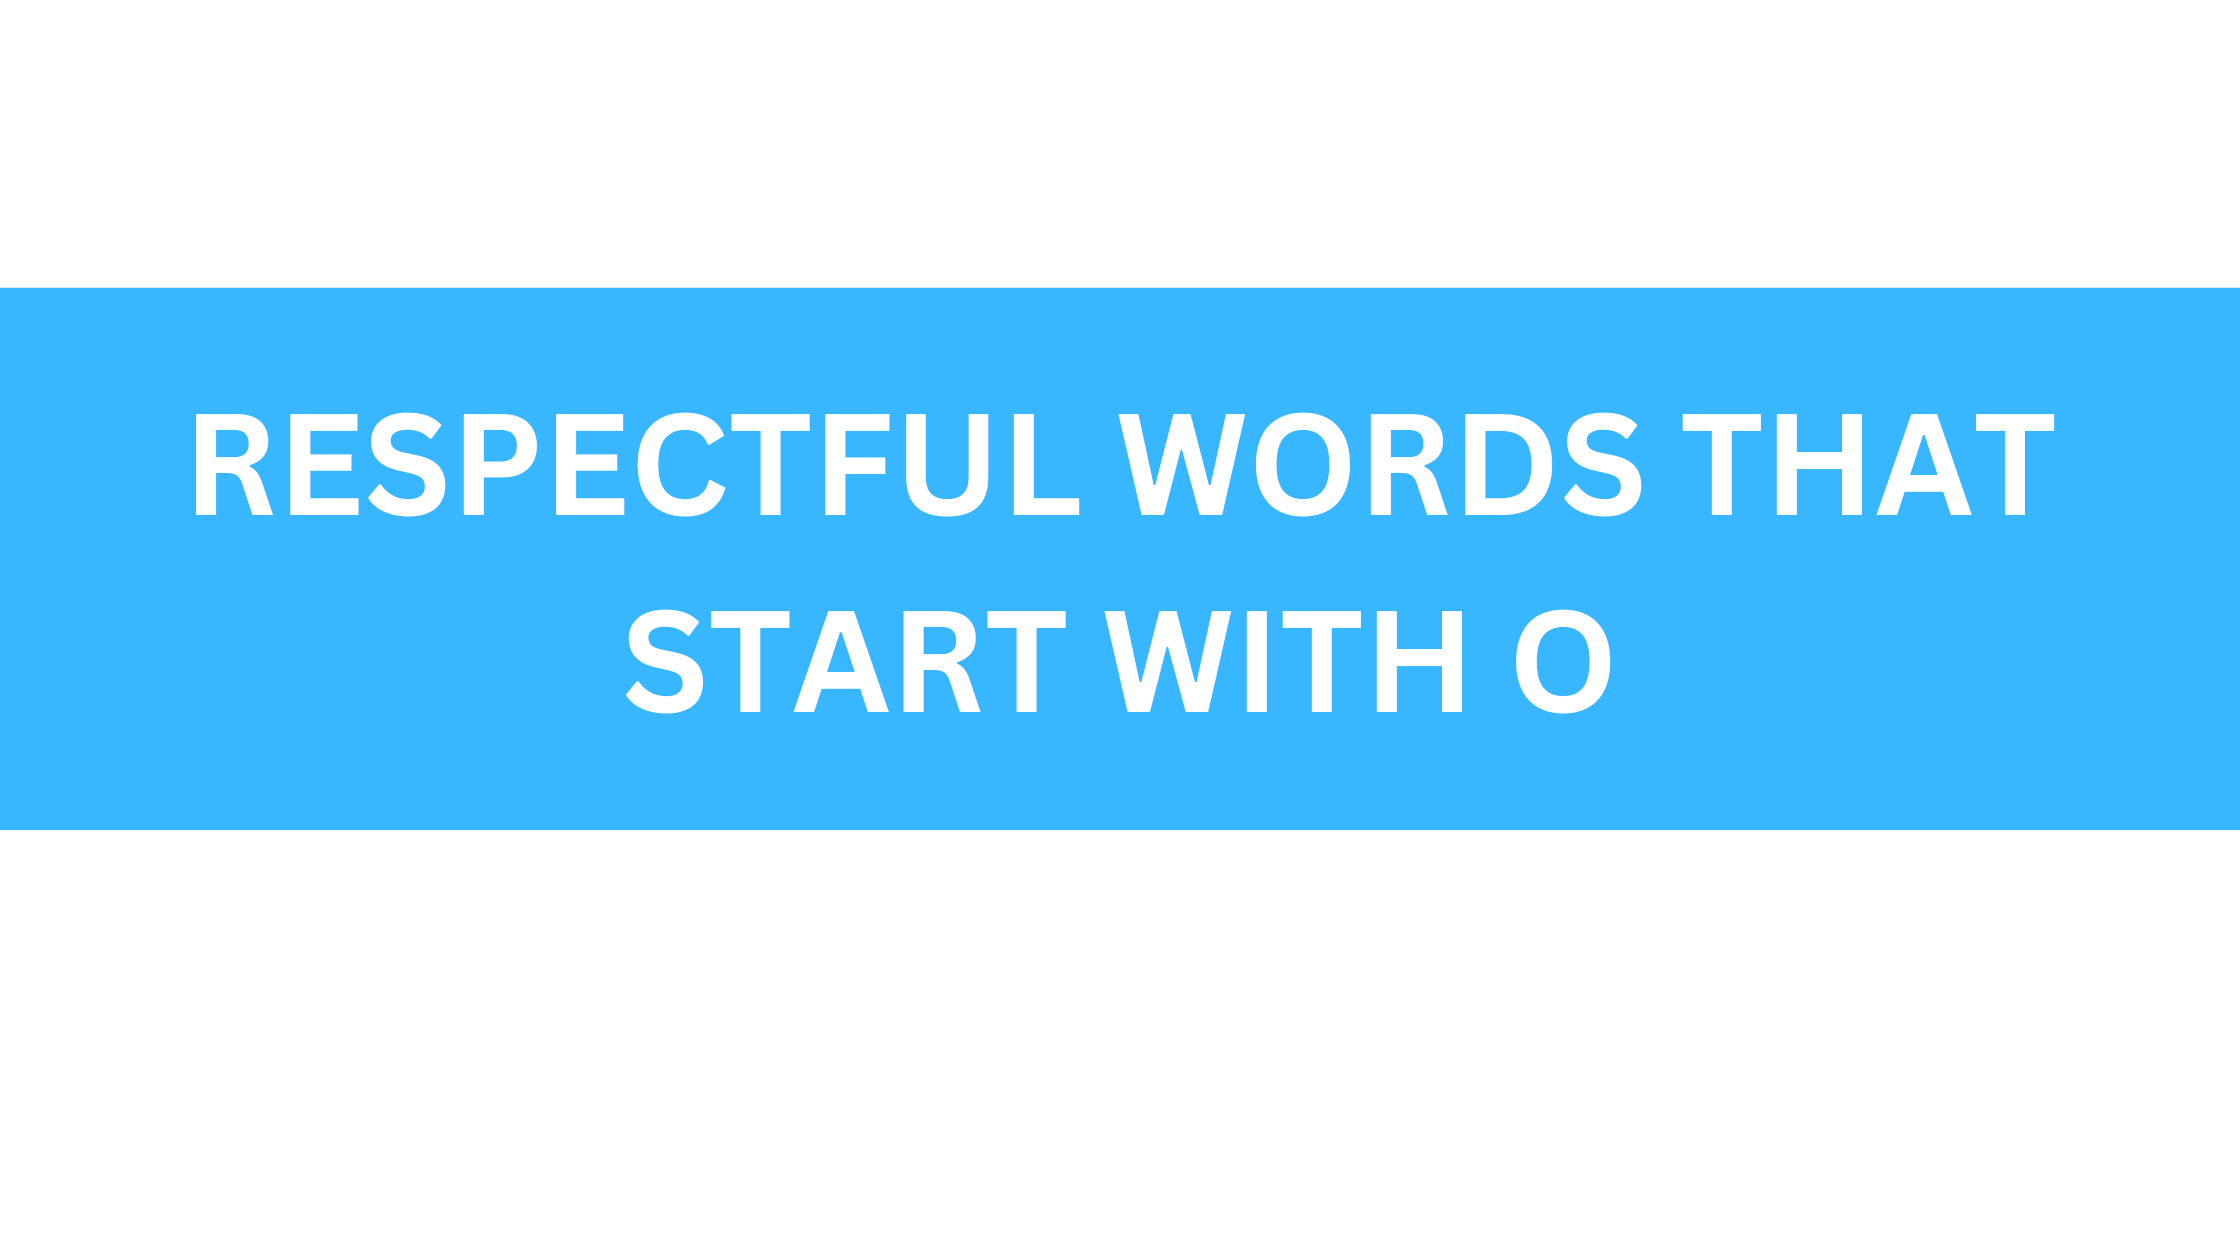 respectful words that start with o